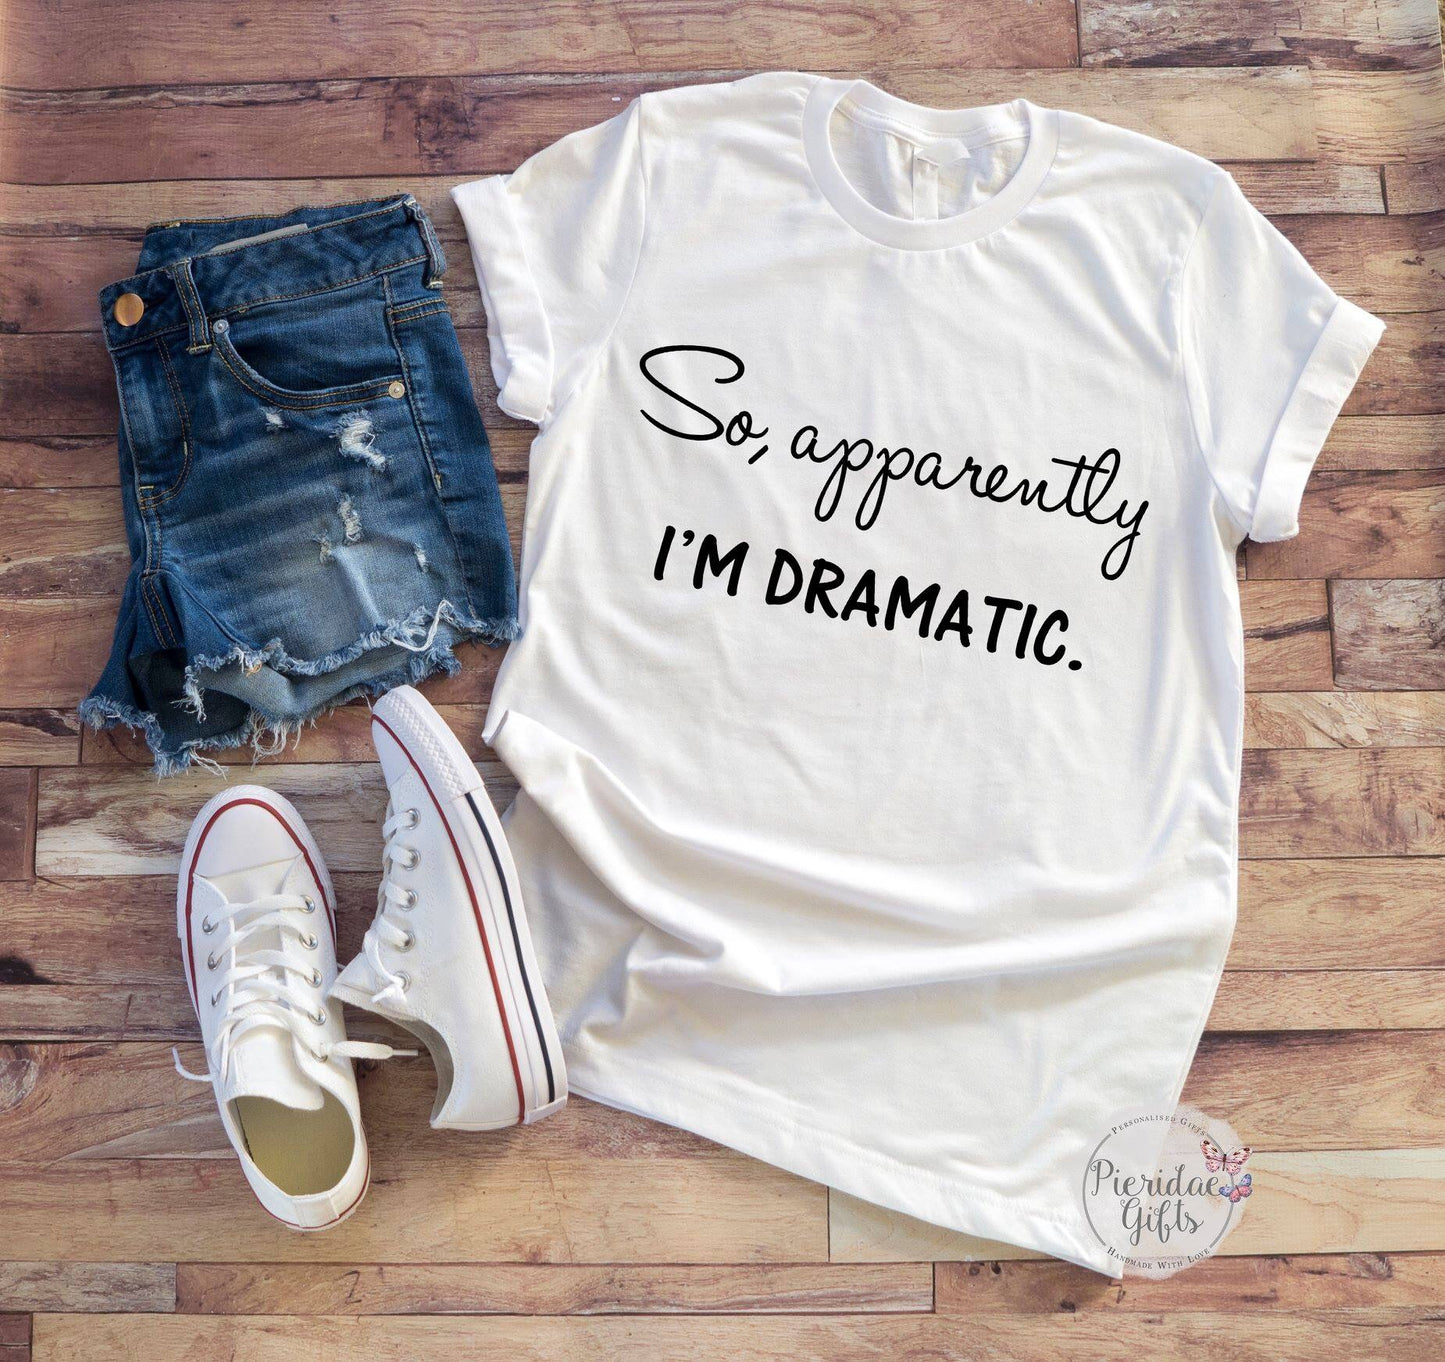 Apparently I'm dramatic sarcastic funny humour t shirt